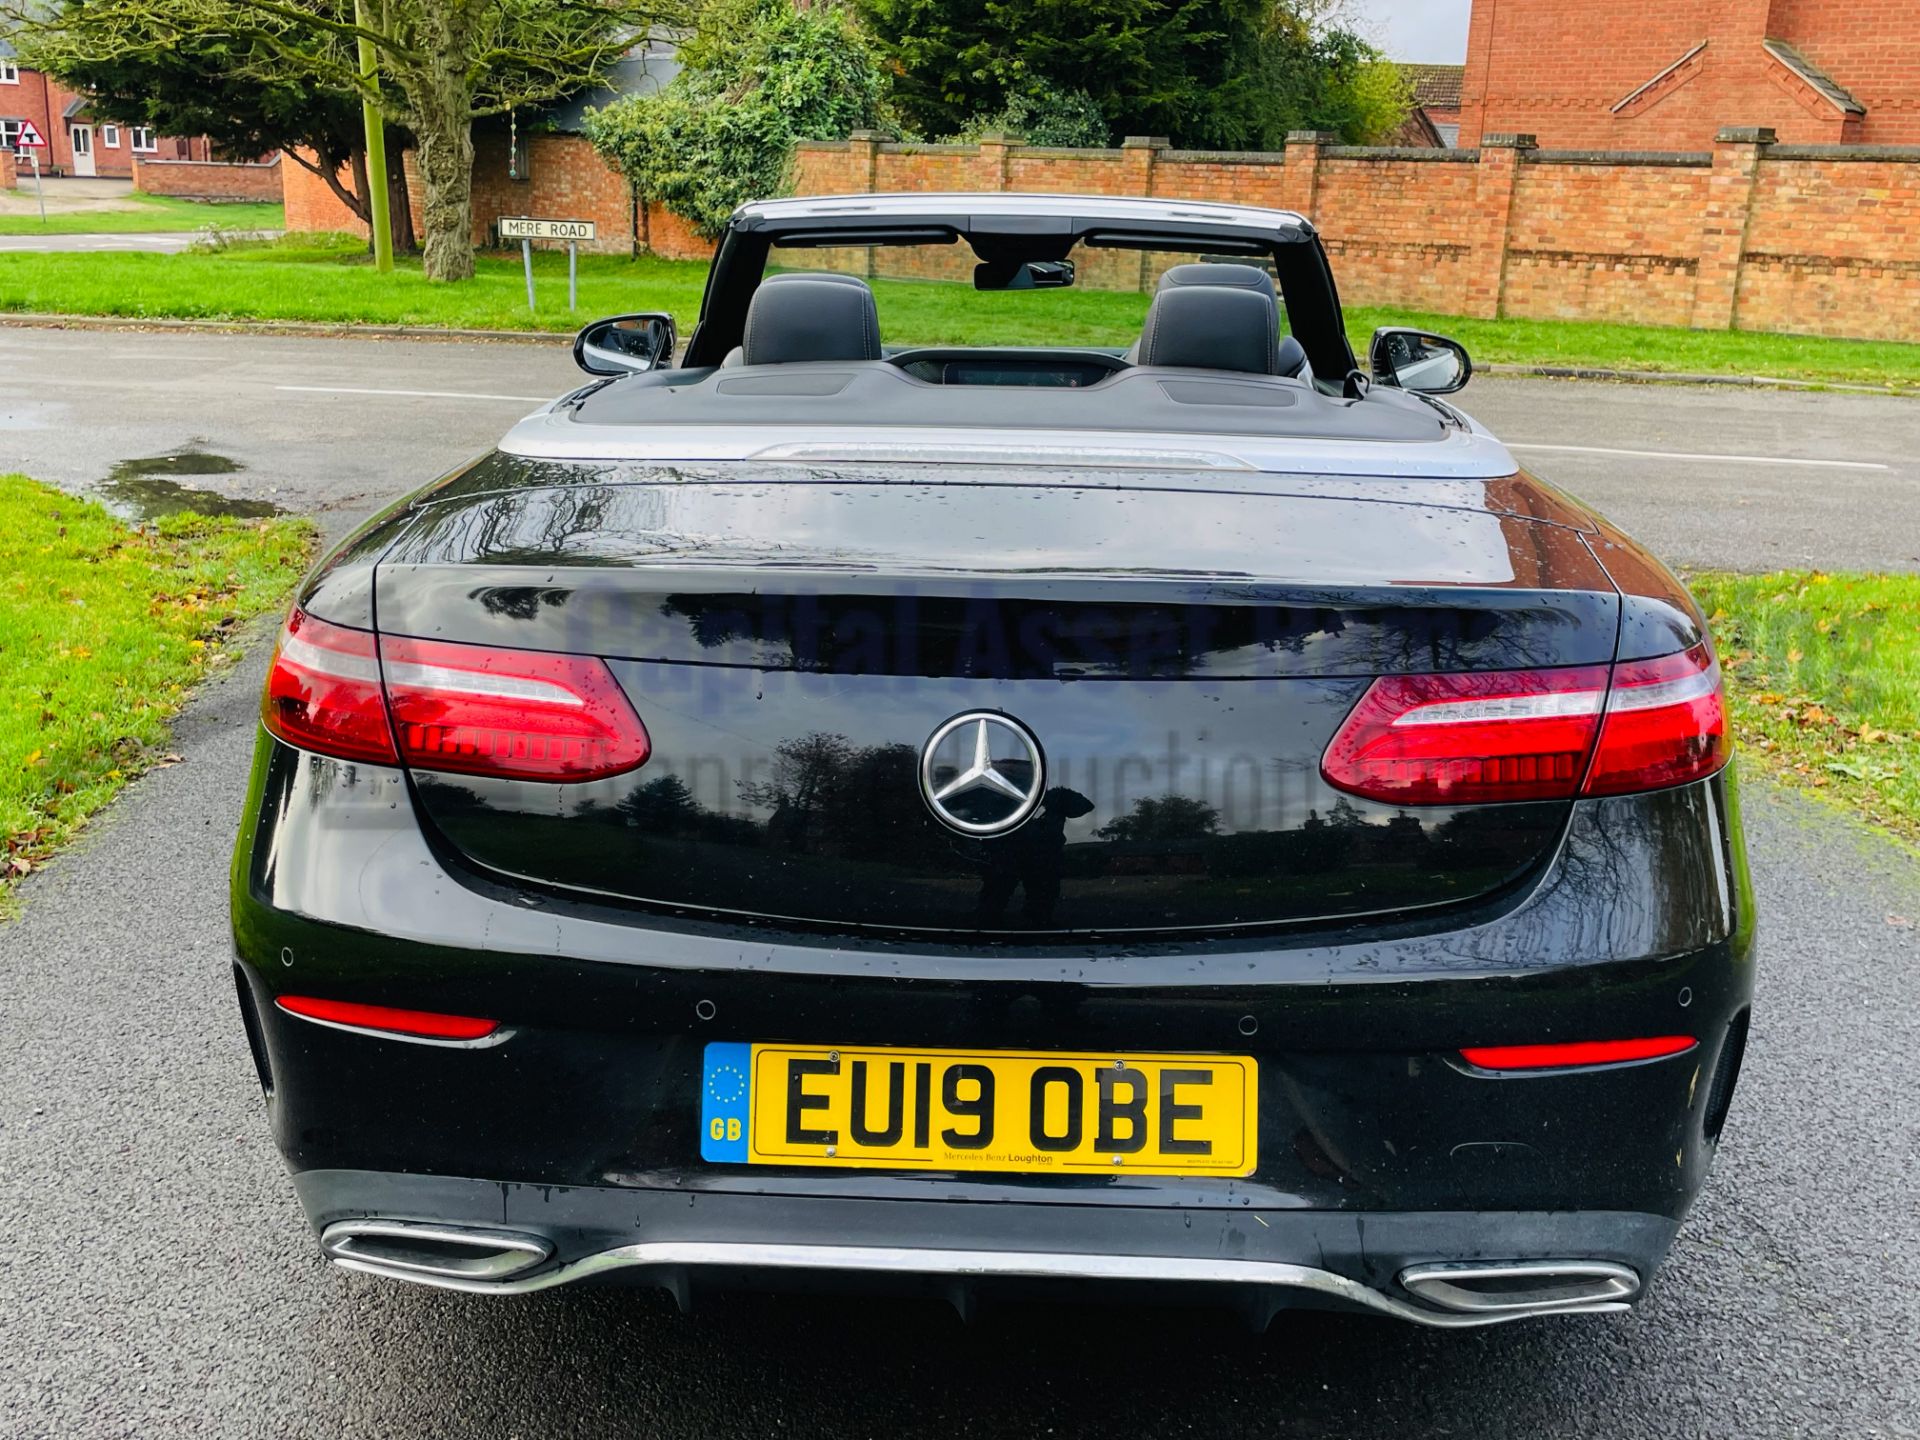 MERCEDES-BENZ E220D *AMG LINE - CABRIOLET* (2019 - EURO 6) '9G TRONIC AUTO - SAT NAV' *FULLY LOADED* - Image 21 of 66